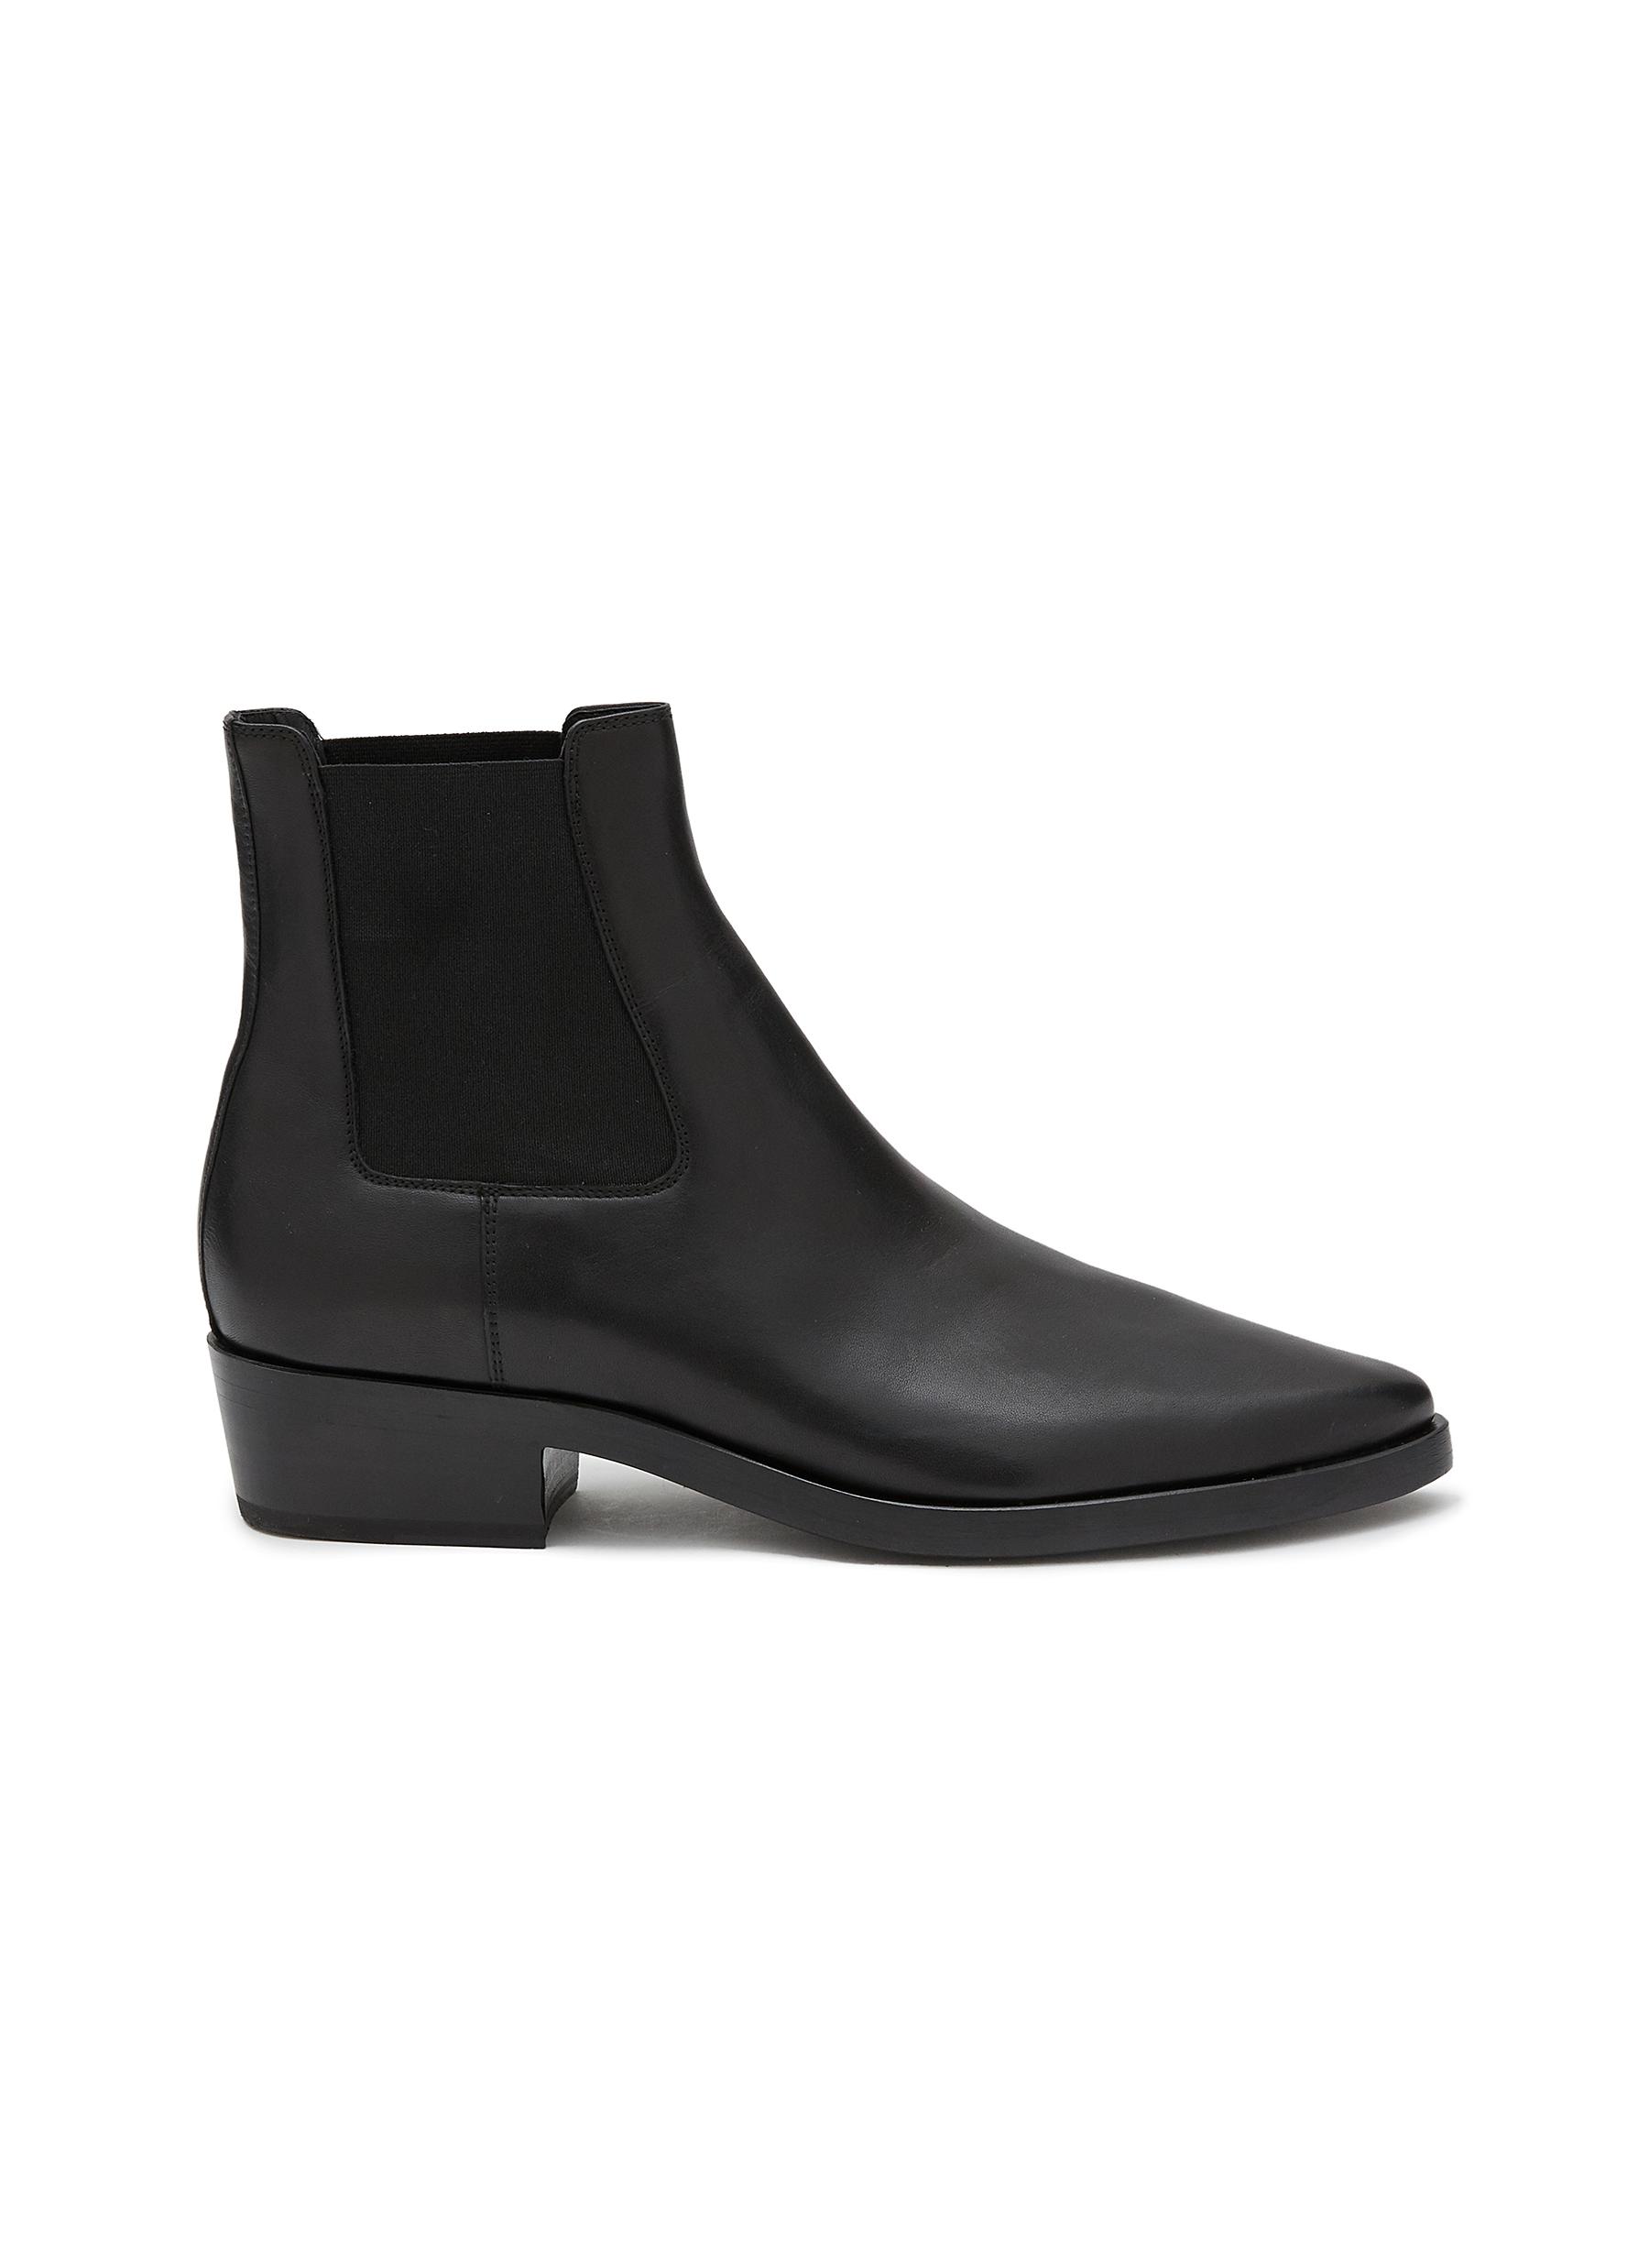 FEAR OF GOD ETERNAL LEATHER COWBOY BOOTS